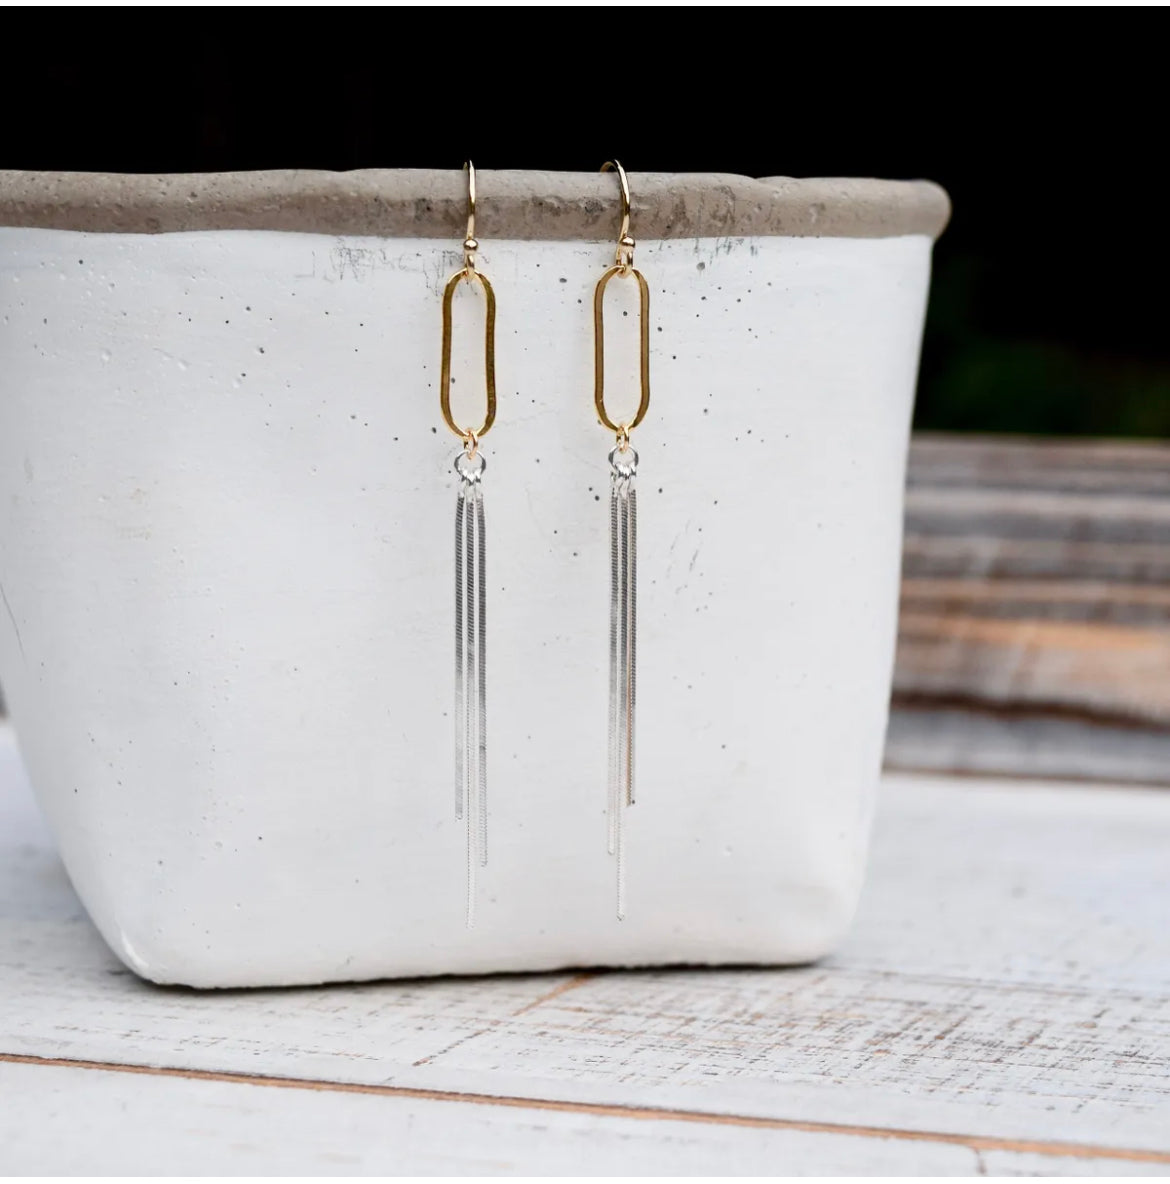 Elevate your look with our Artisan Paperclip Tassel Earrings, featuring 14k gold filled chain links and sterling silver tassels on 14k gold filled ear wire. Each earring measures approximately 2 3/4 inches, adding a touch of elegance and handcrafted charm to your ensemble. Handmade in the USA with care and attention to detail, these earrings are the perfect statement piece for any occasion.